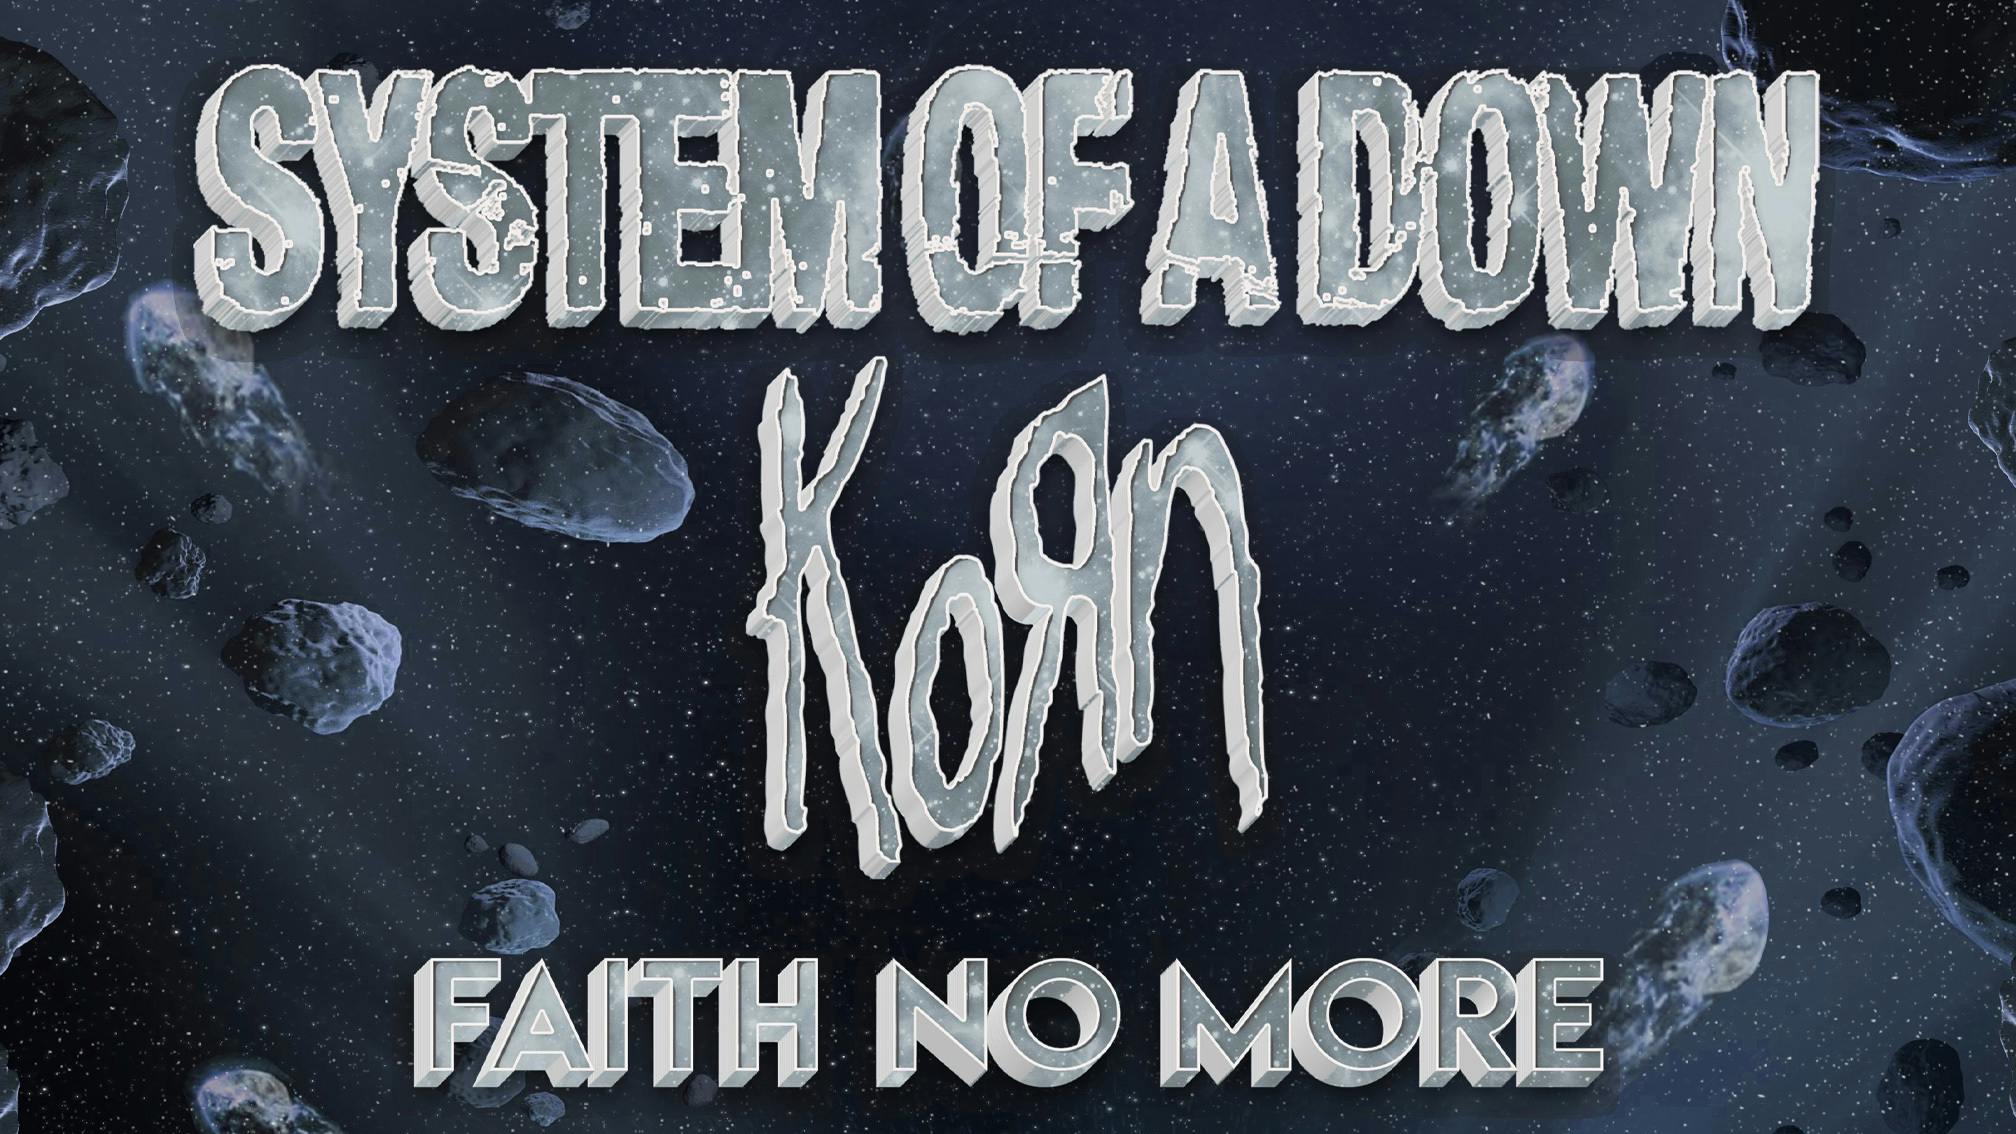 System Of A Down, Korn, Faith No More reschedule stadium shows: "Hopefully this will be the last time the dates are moved"